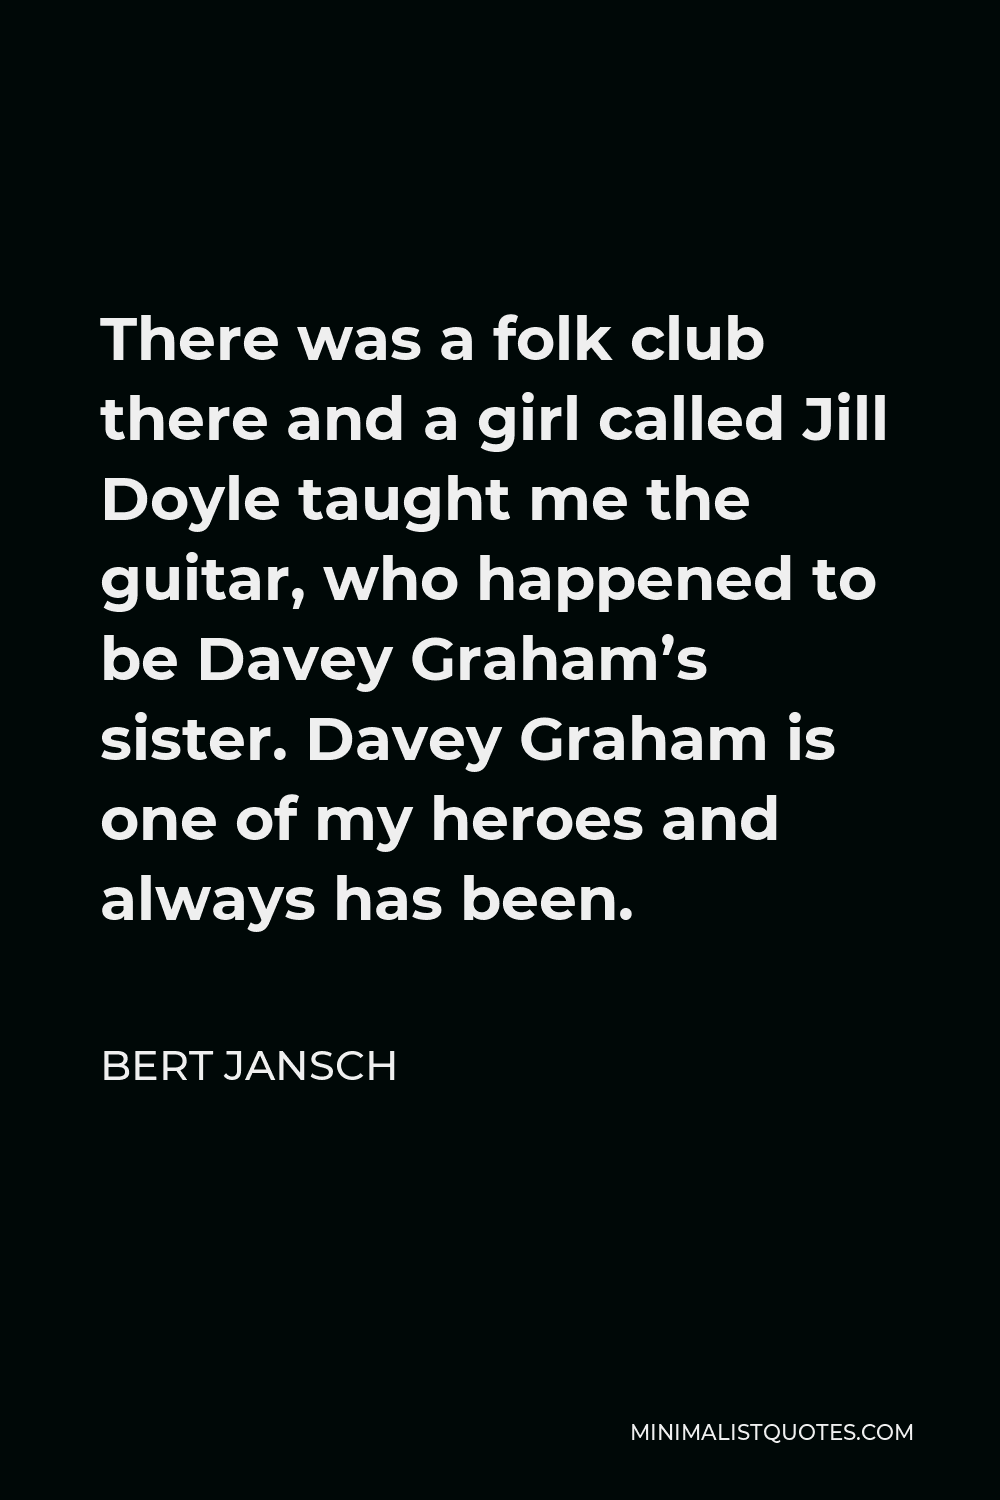 Bert Jansch Quote - There was a folk club there and a girl called Jill Doyle taught me the guitar, who happened to be Davey Graham’s sister. Davey Graham is one of my heroes and always has been.